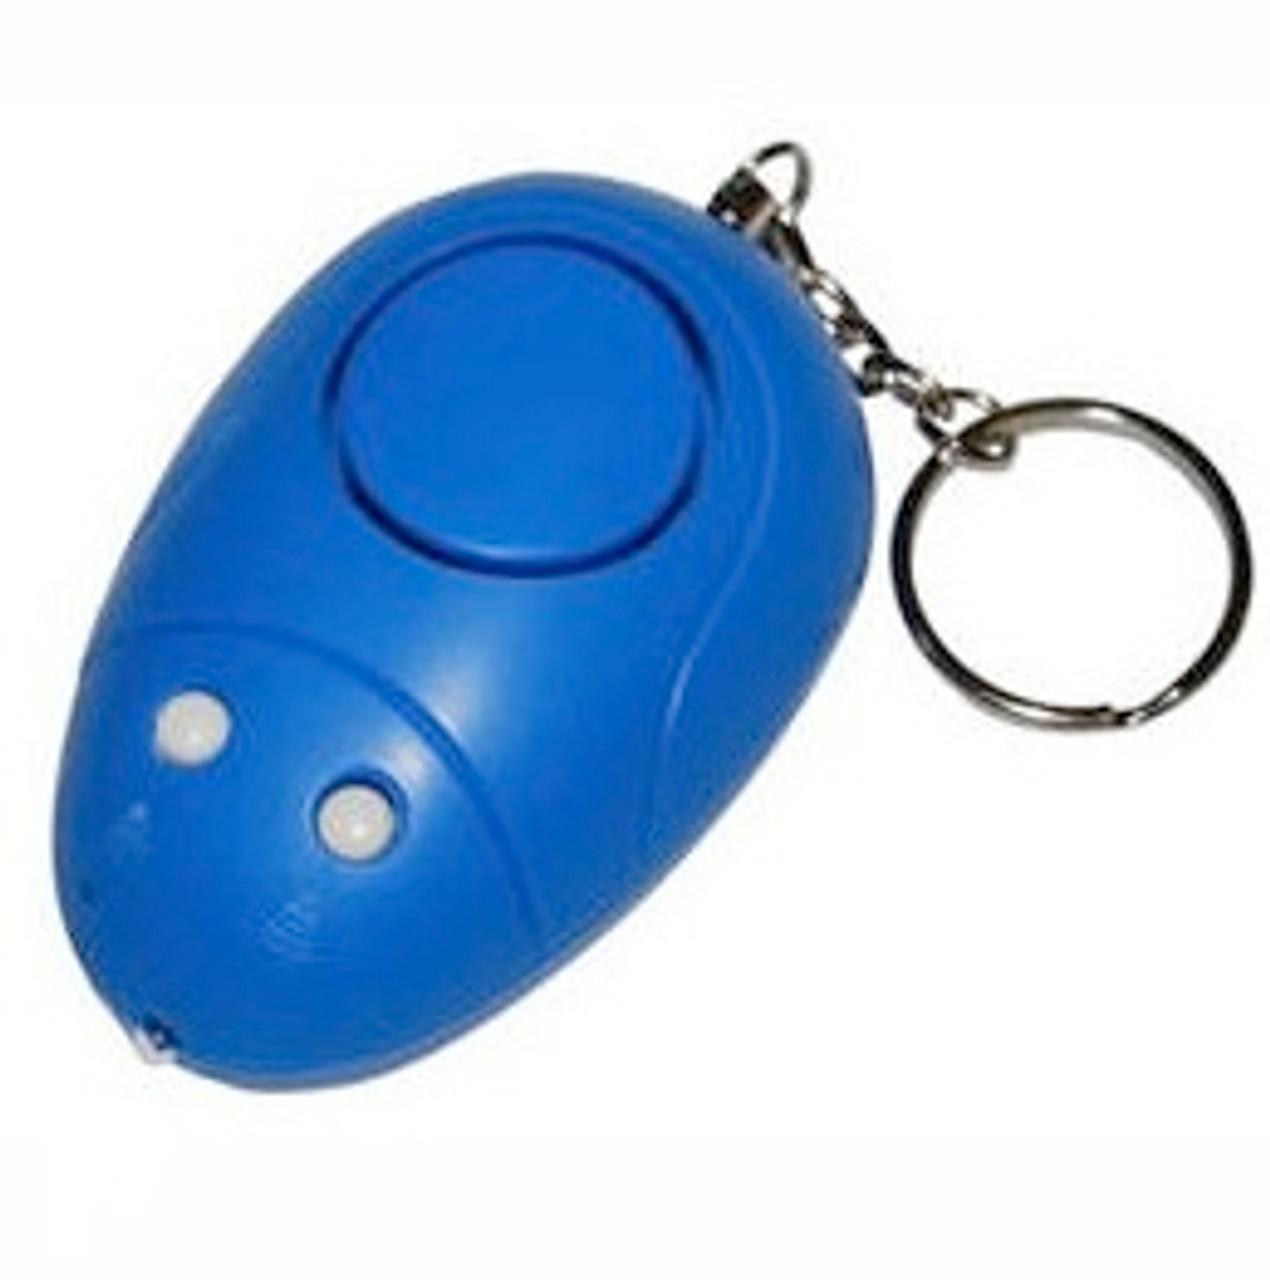 Personal Alarm Key Chain with Flashing Light